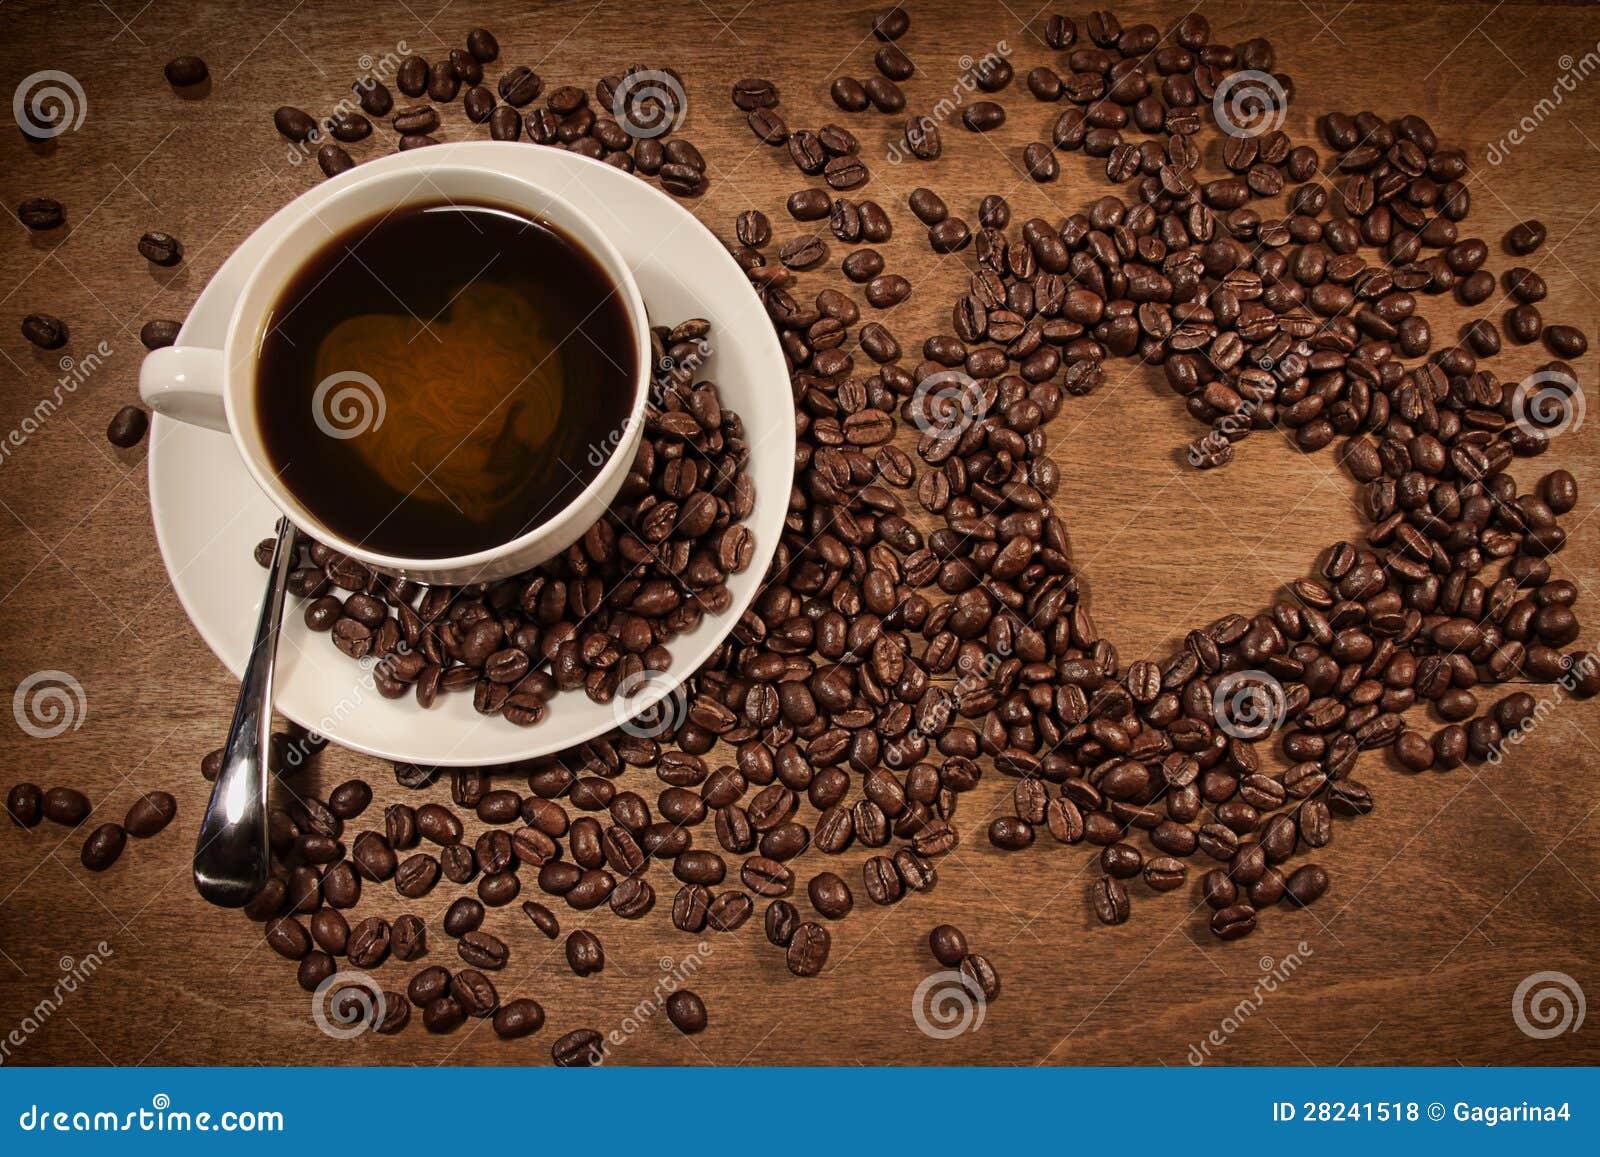 The Cup Of Coffee With Love Royalty Free Stock Photos - Image: 28241518